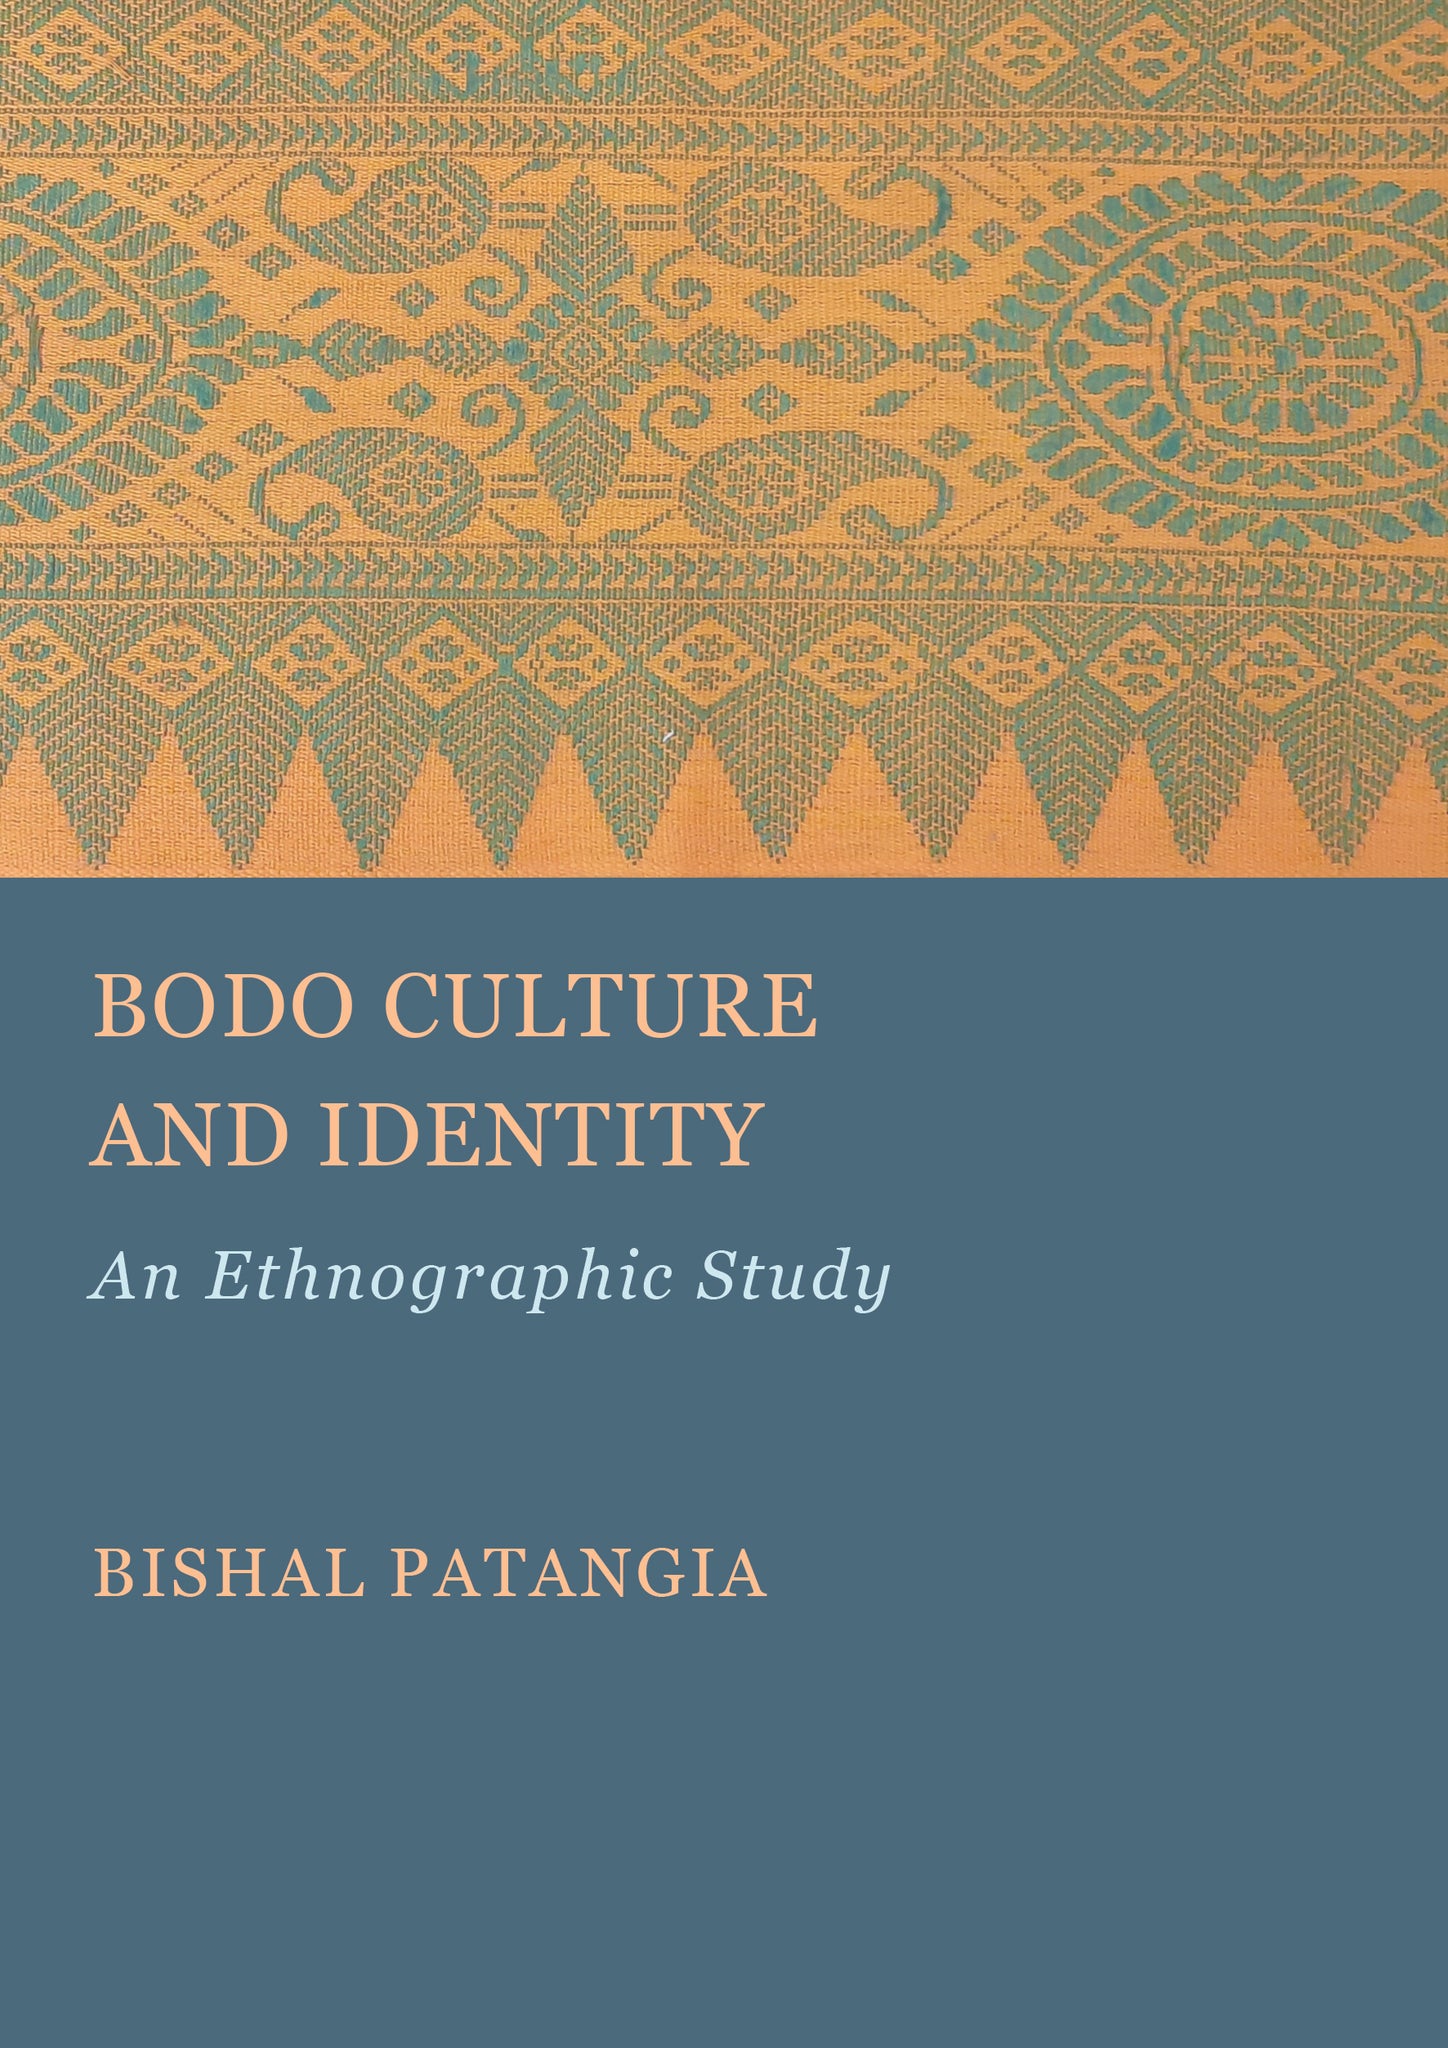 Bodo Culture and Identity: An Ethnographic Study